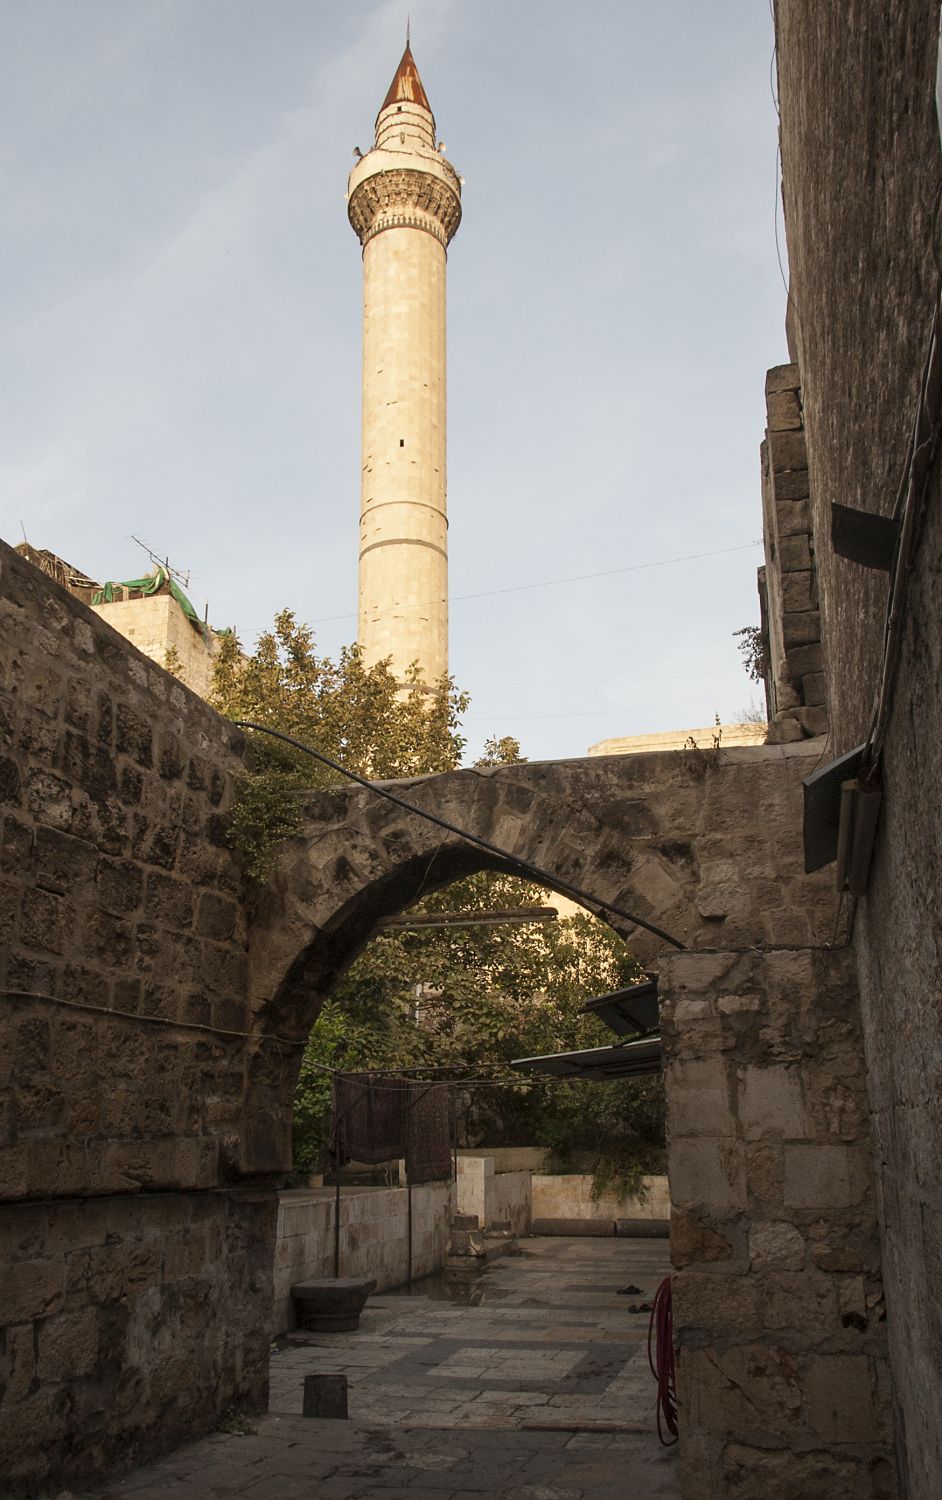 View of minaret from exterior.